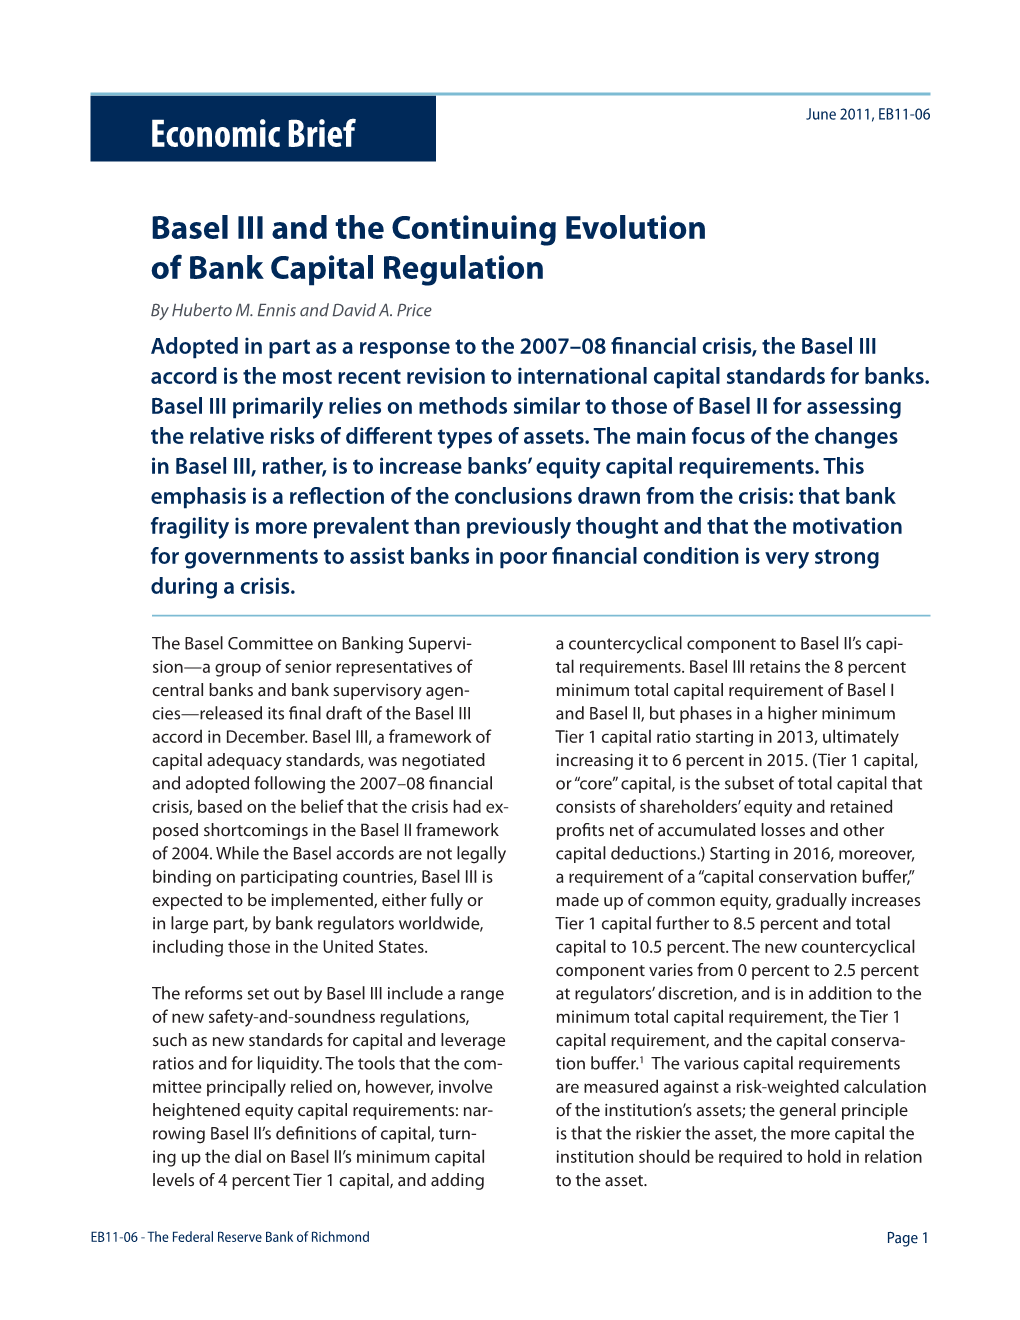 Basel III and the Continuing Evolution of Bank Capital Regulation by Huberto M